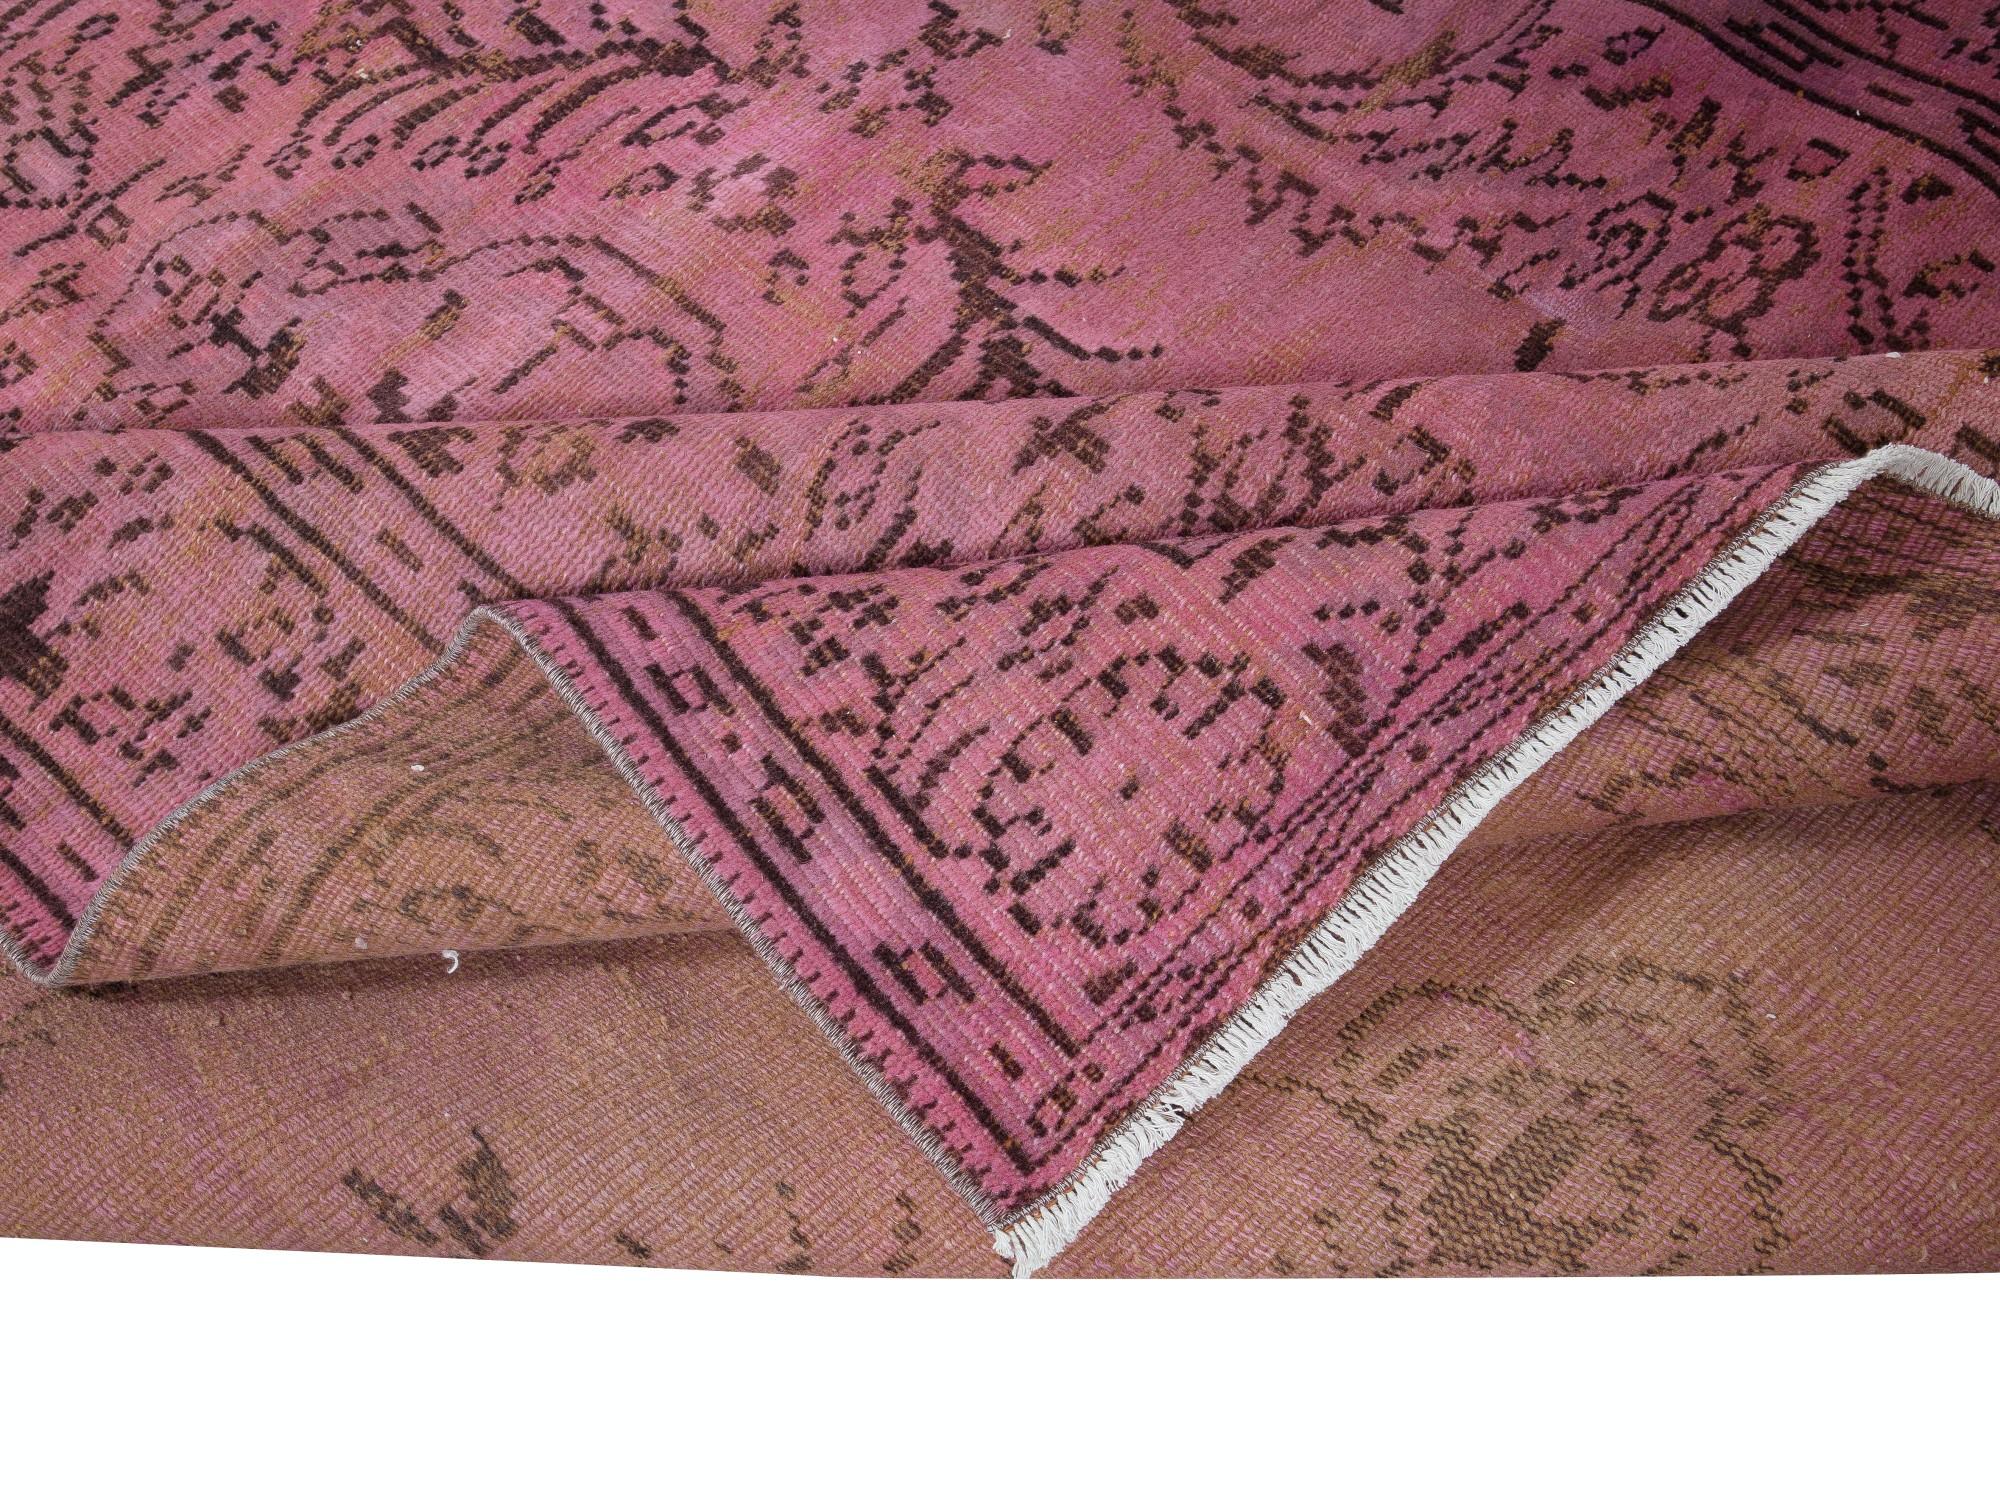 6x9.3 Ft Pink Over-Dyed Handmade Turkish Area Rug for Modern Home & Office Decor In Good Condition For Sale In Philadelphia, PA